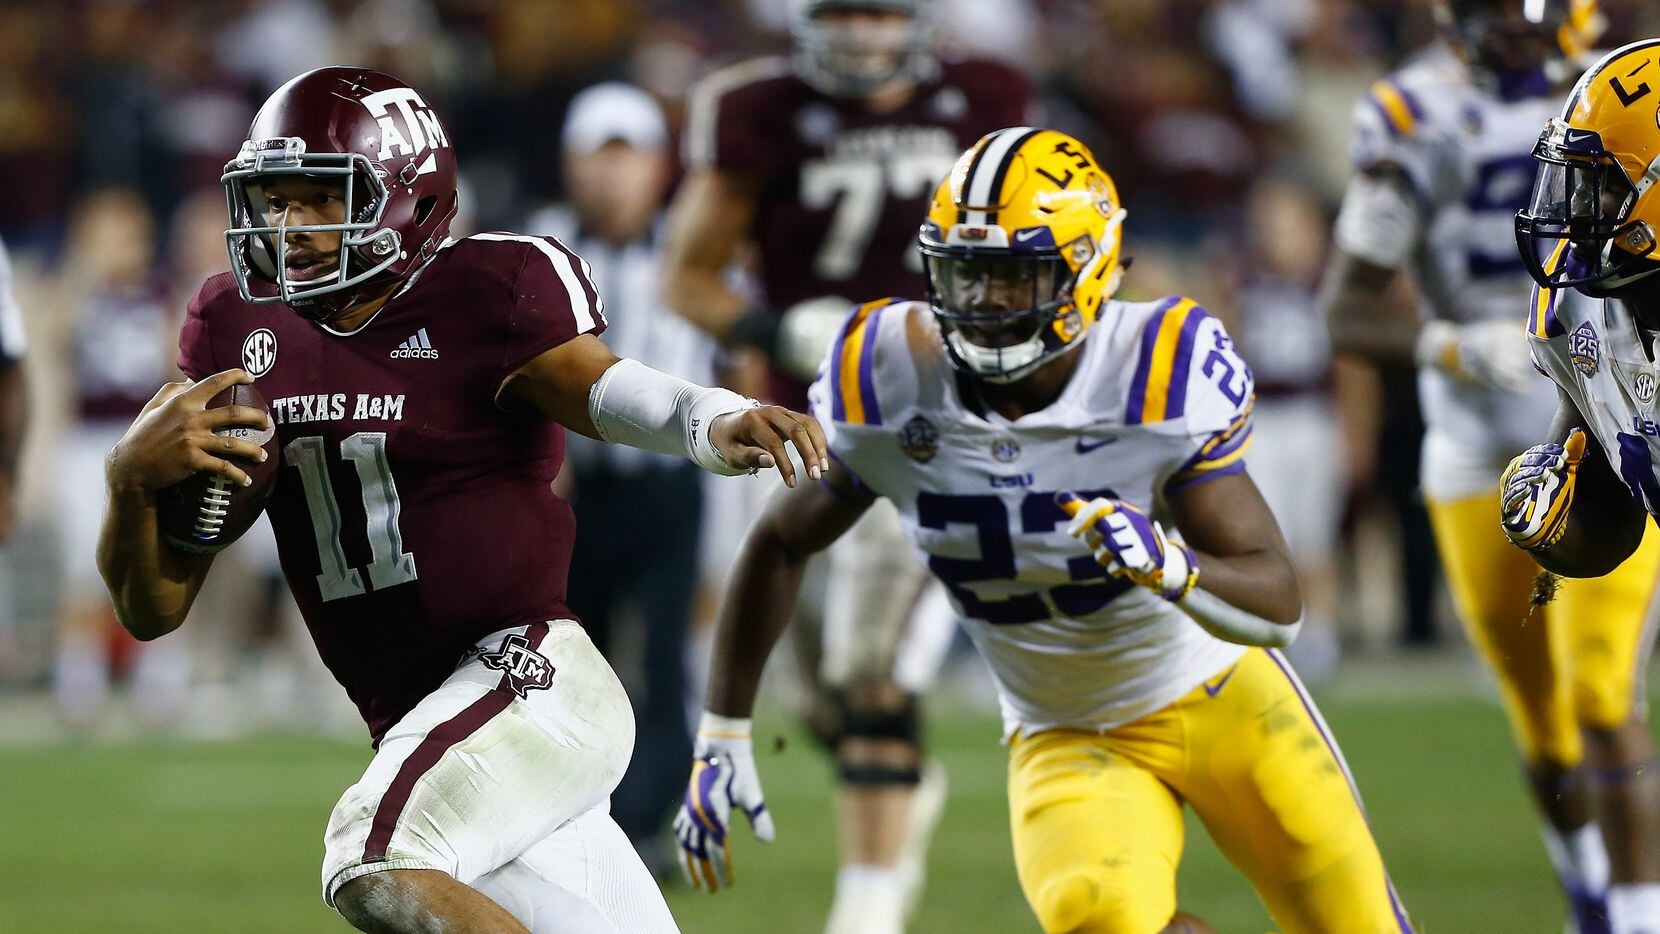 COLLEGE STATION, TEXAS - NOVEMBER 24: Kellen Mond #11 of the Texas A&M Aggies rushes past Micah Baskerville #23 of the LSU Tigers in overtime at Kyle Field on November 24, 2018 in College Station, Texas.